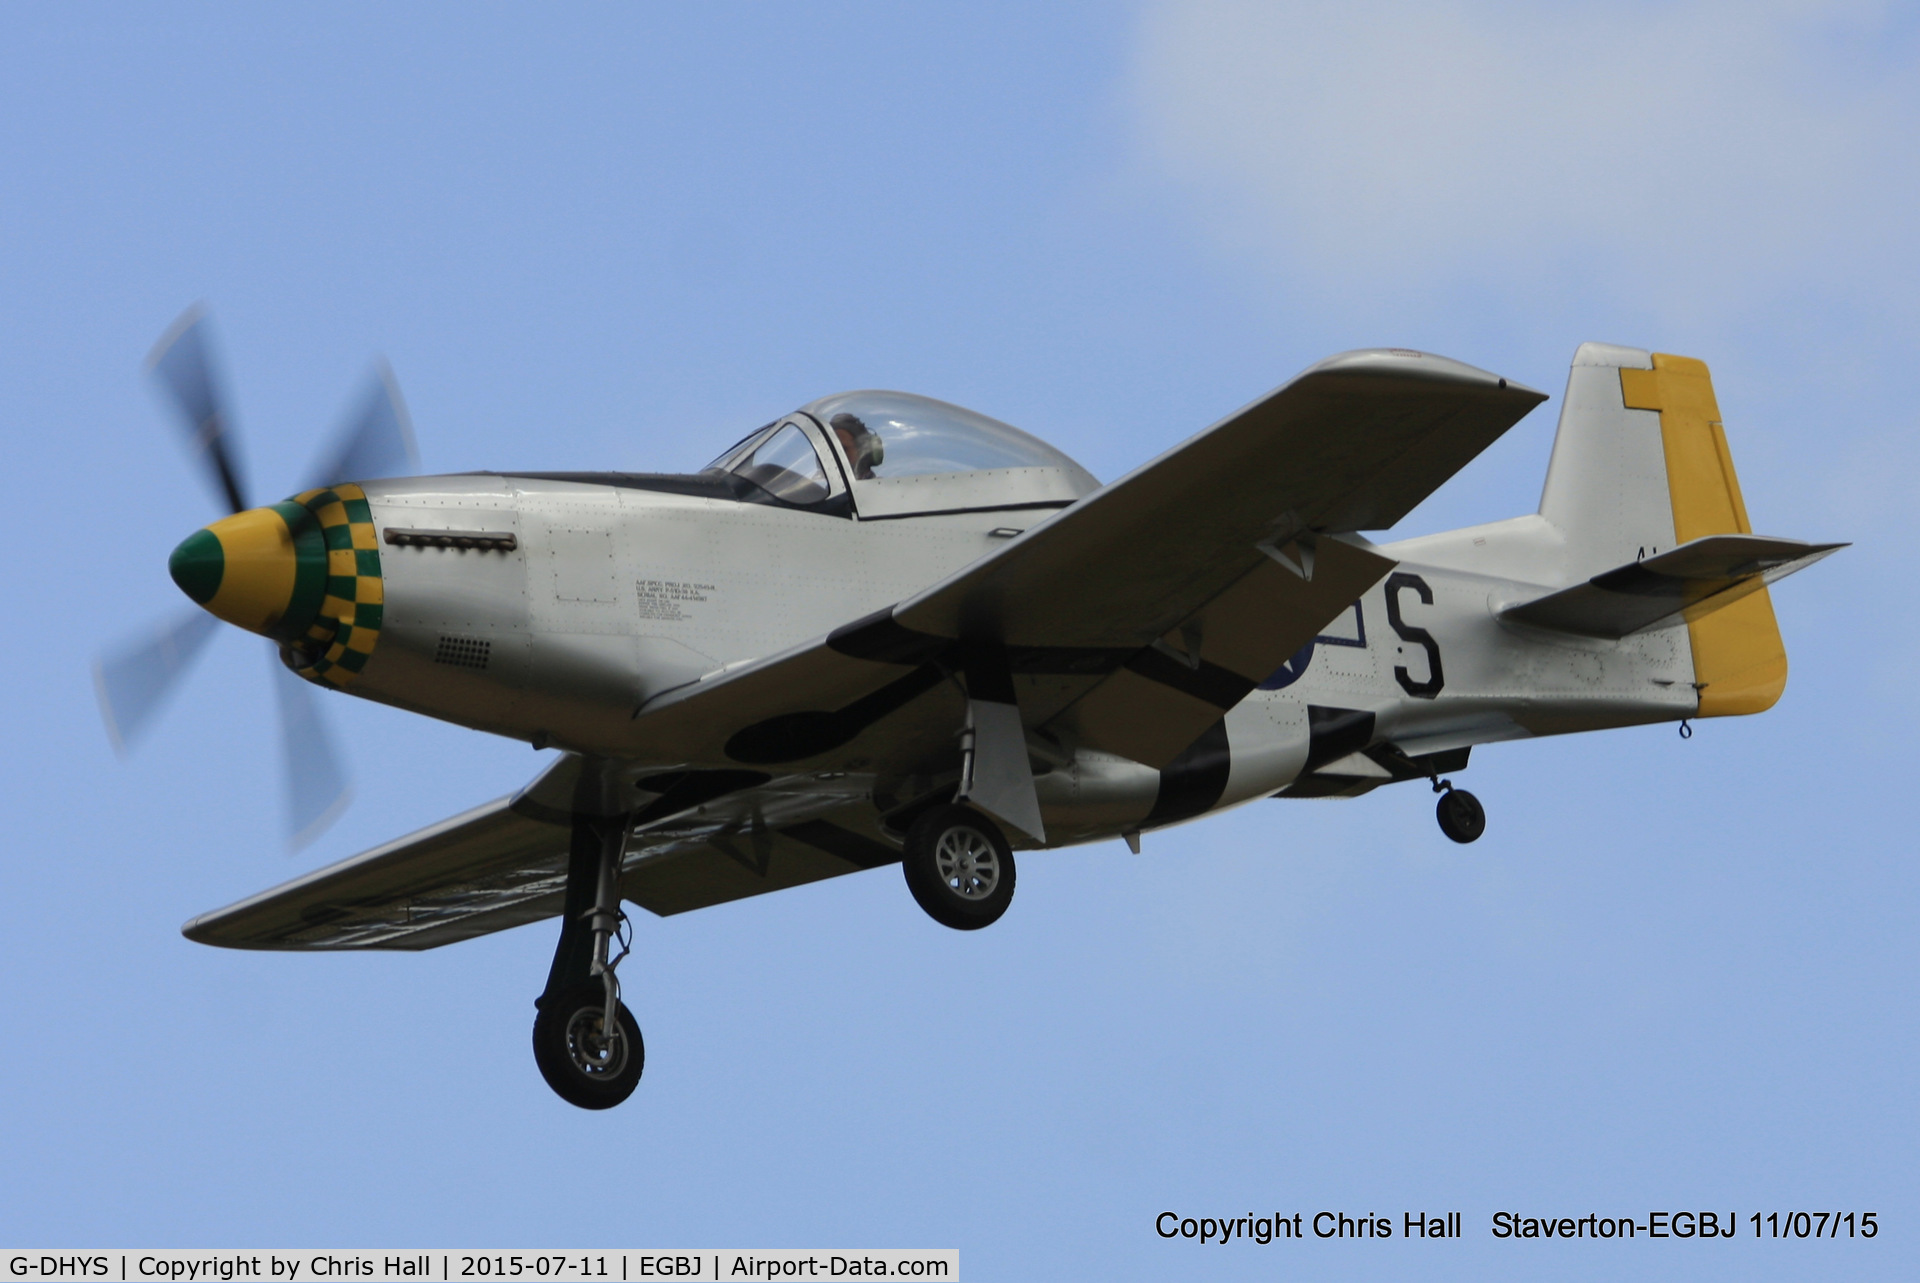 G-DHYS, 2014 Titan T-51 Mustang C/N LAA 355-15190, on finals at Staverton